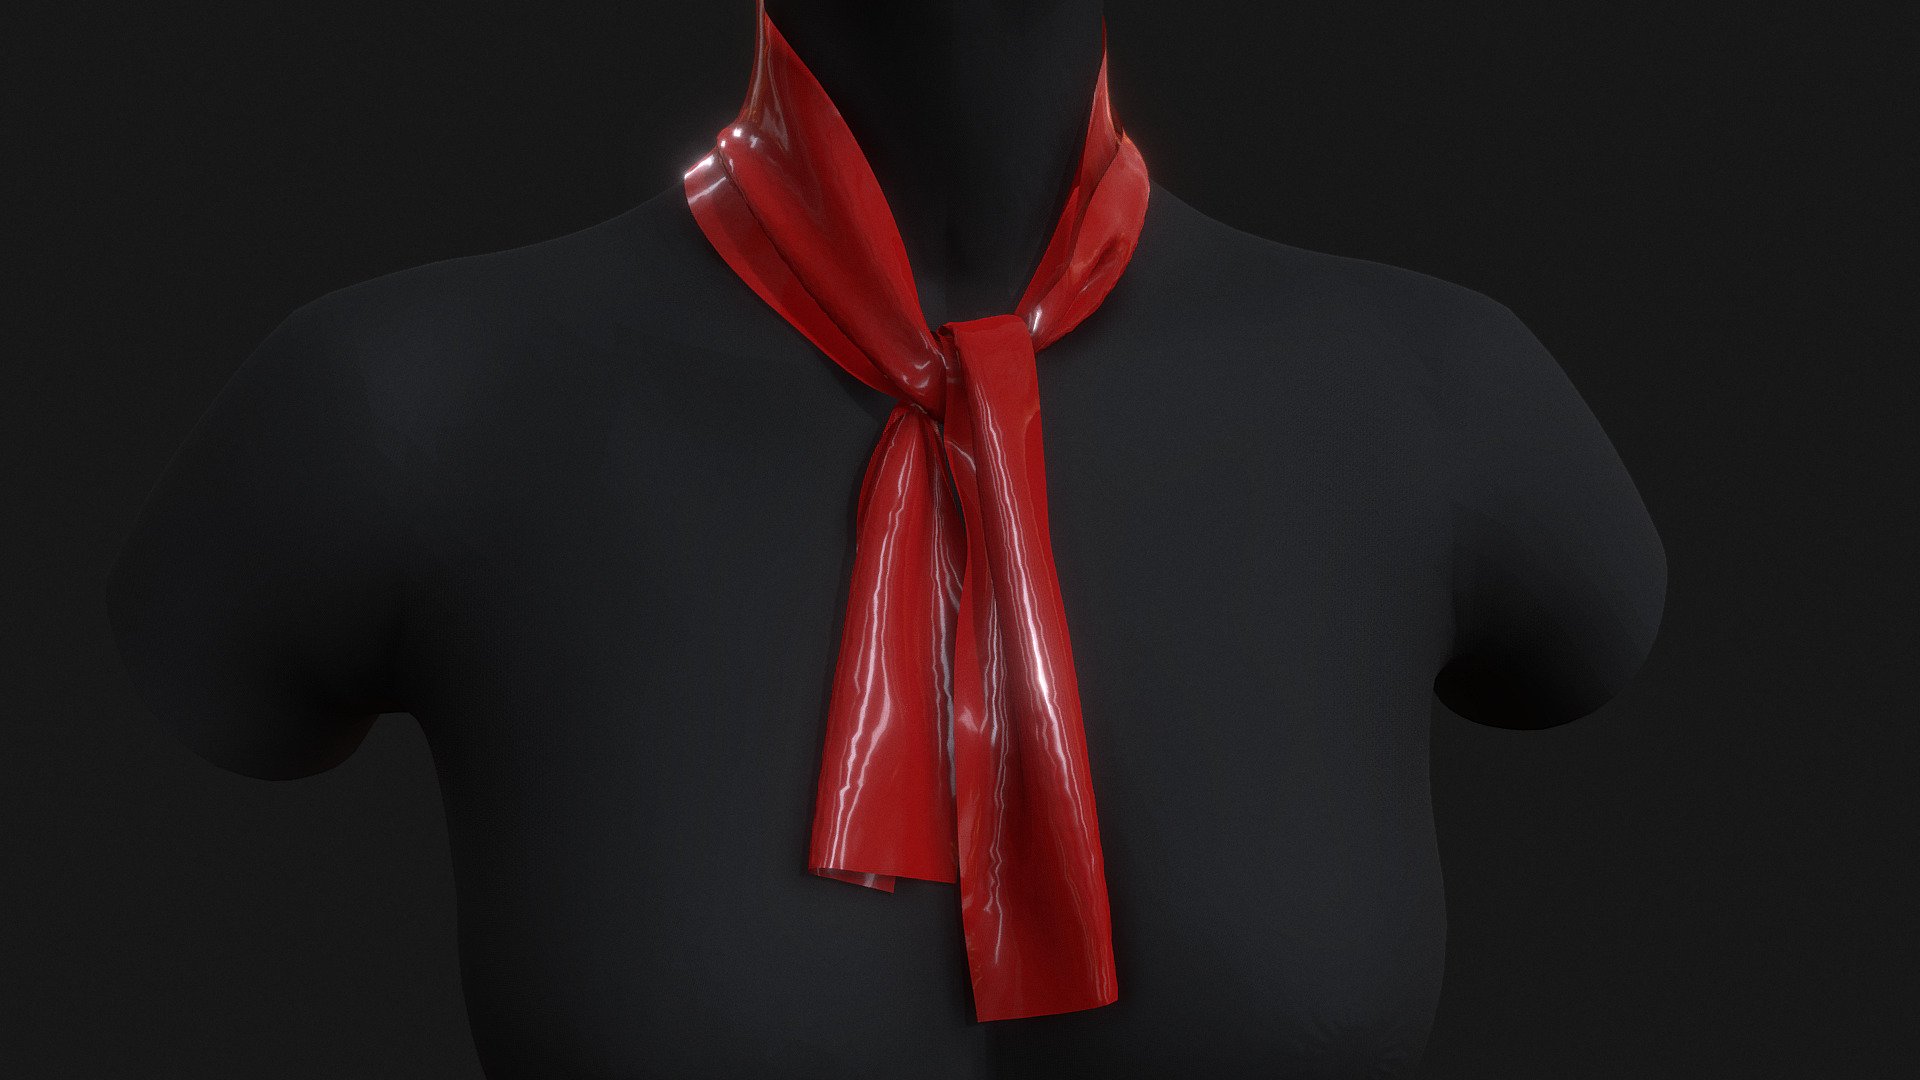 Realistic highpoly rubber red neckerchief
made with marvelous designer

women's fashion clothing free - Neckerchief - Download Free 3D model by hectopod 3d model